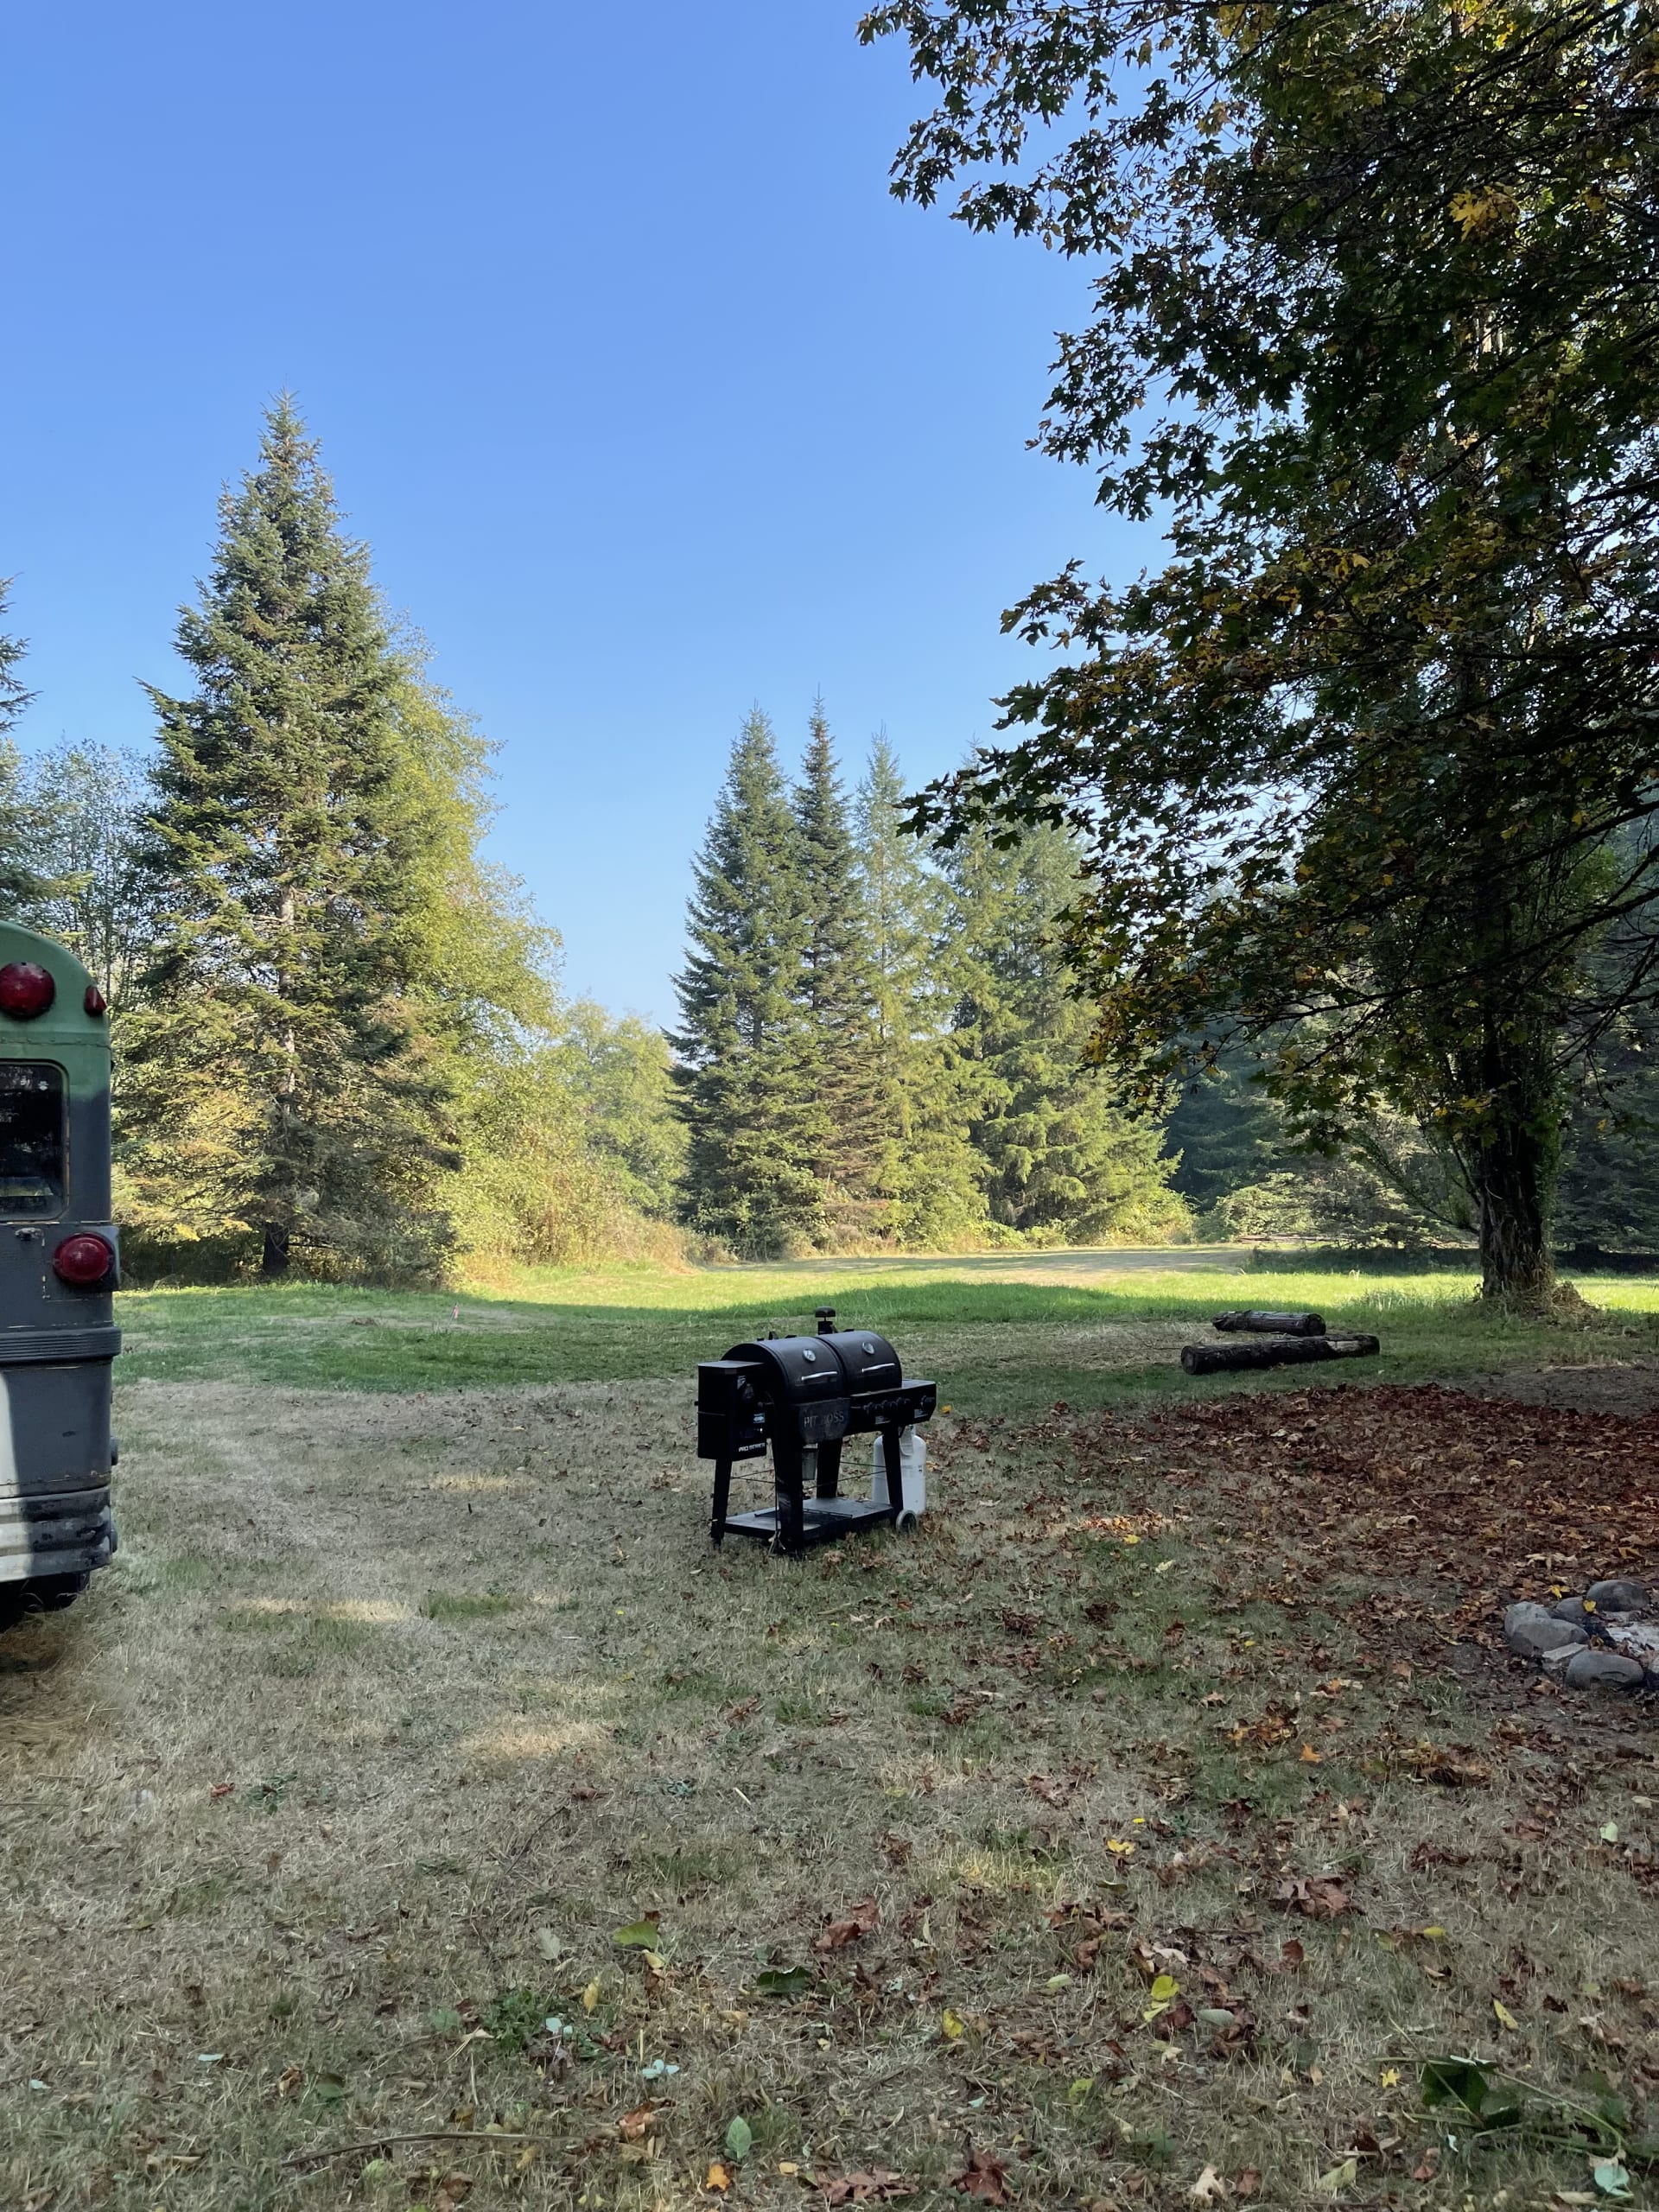 Discover the best ranch campgrounds near Lake Tapps, Washington